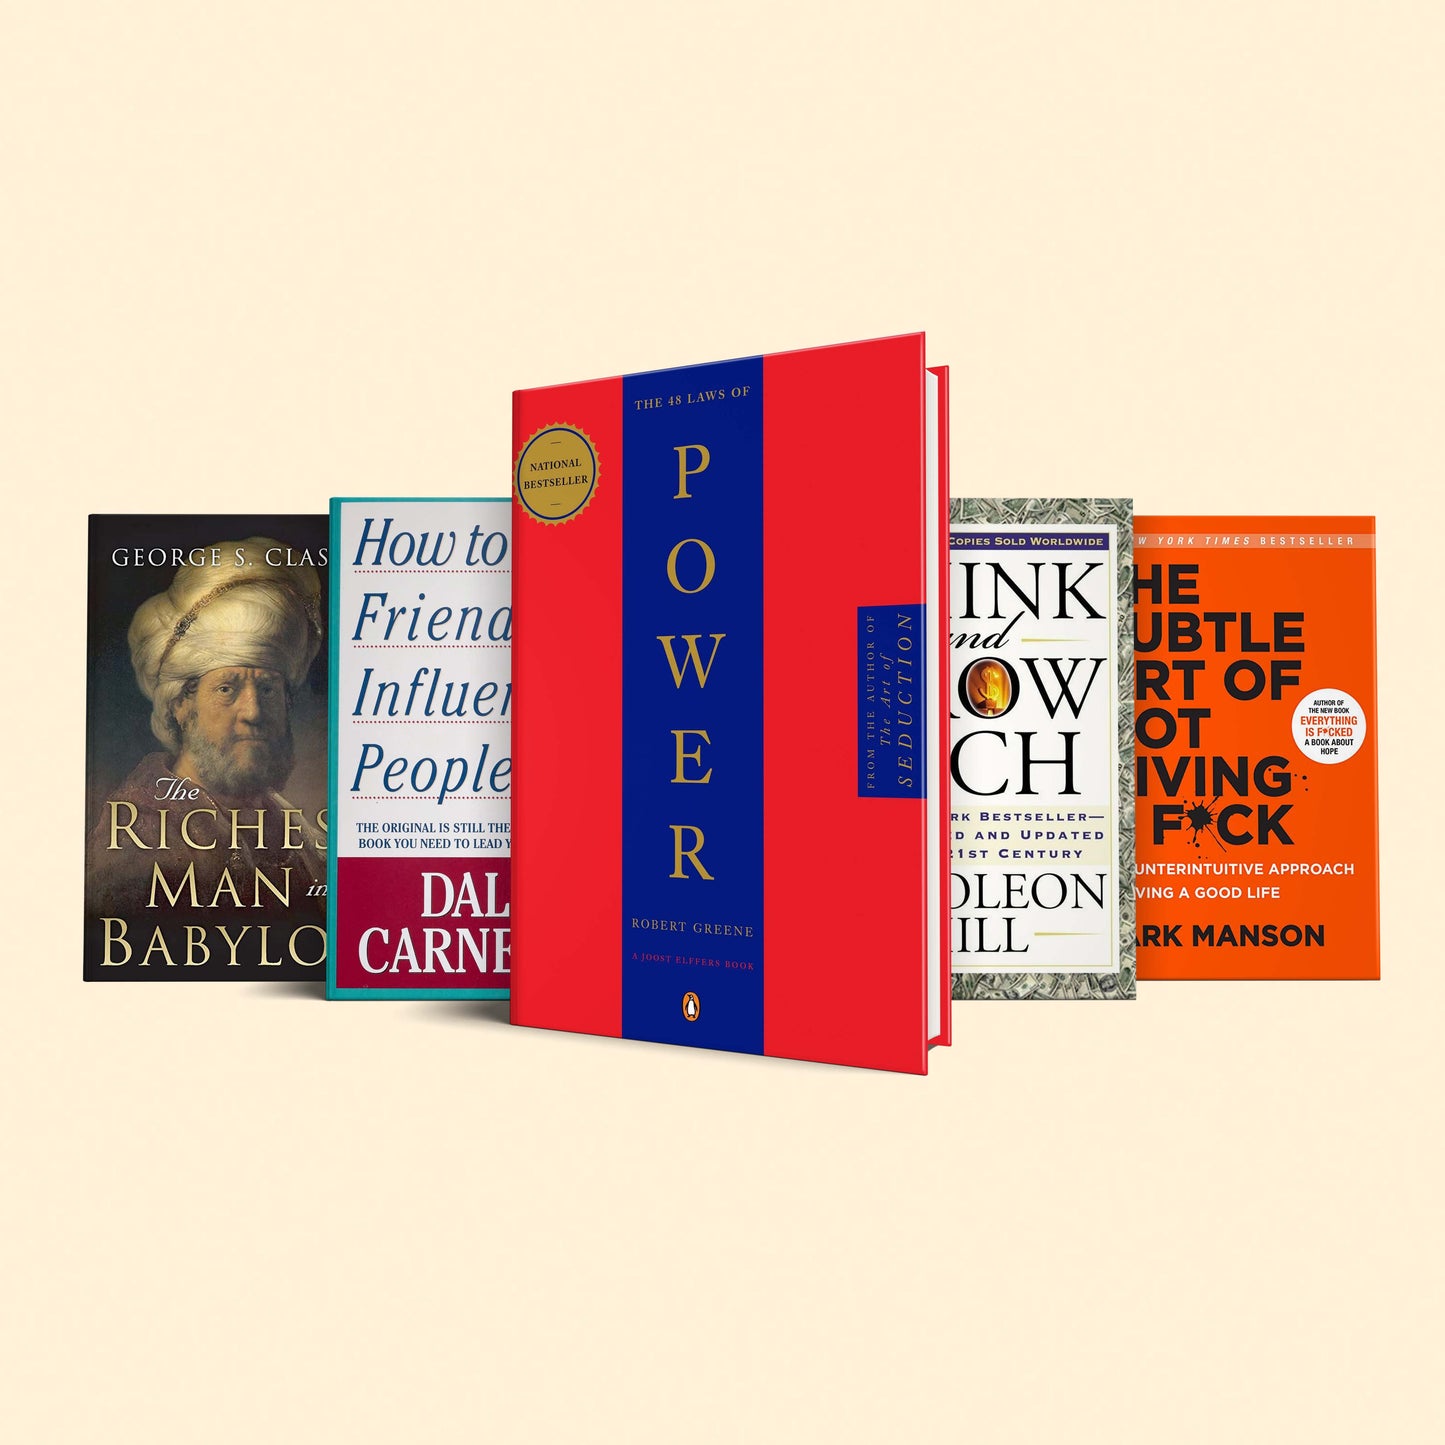 5 Must read books for Ambitious Men in their 20's : Think and grow rich, The 48 laws of power, How to win friends and influence people, The subtle art of not giving a fuck, The richest man in babylon